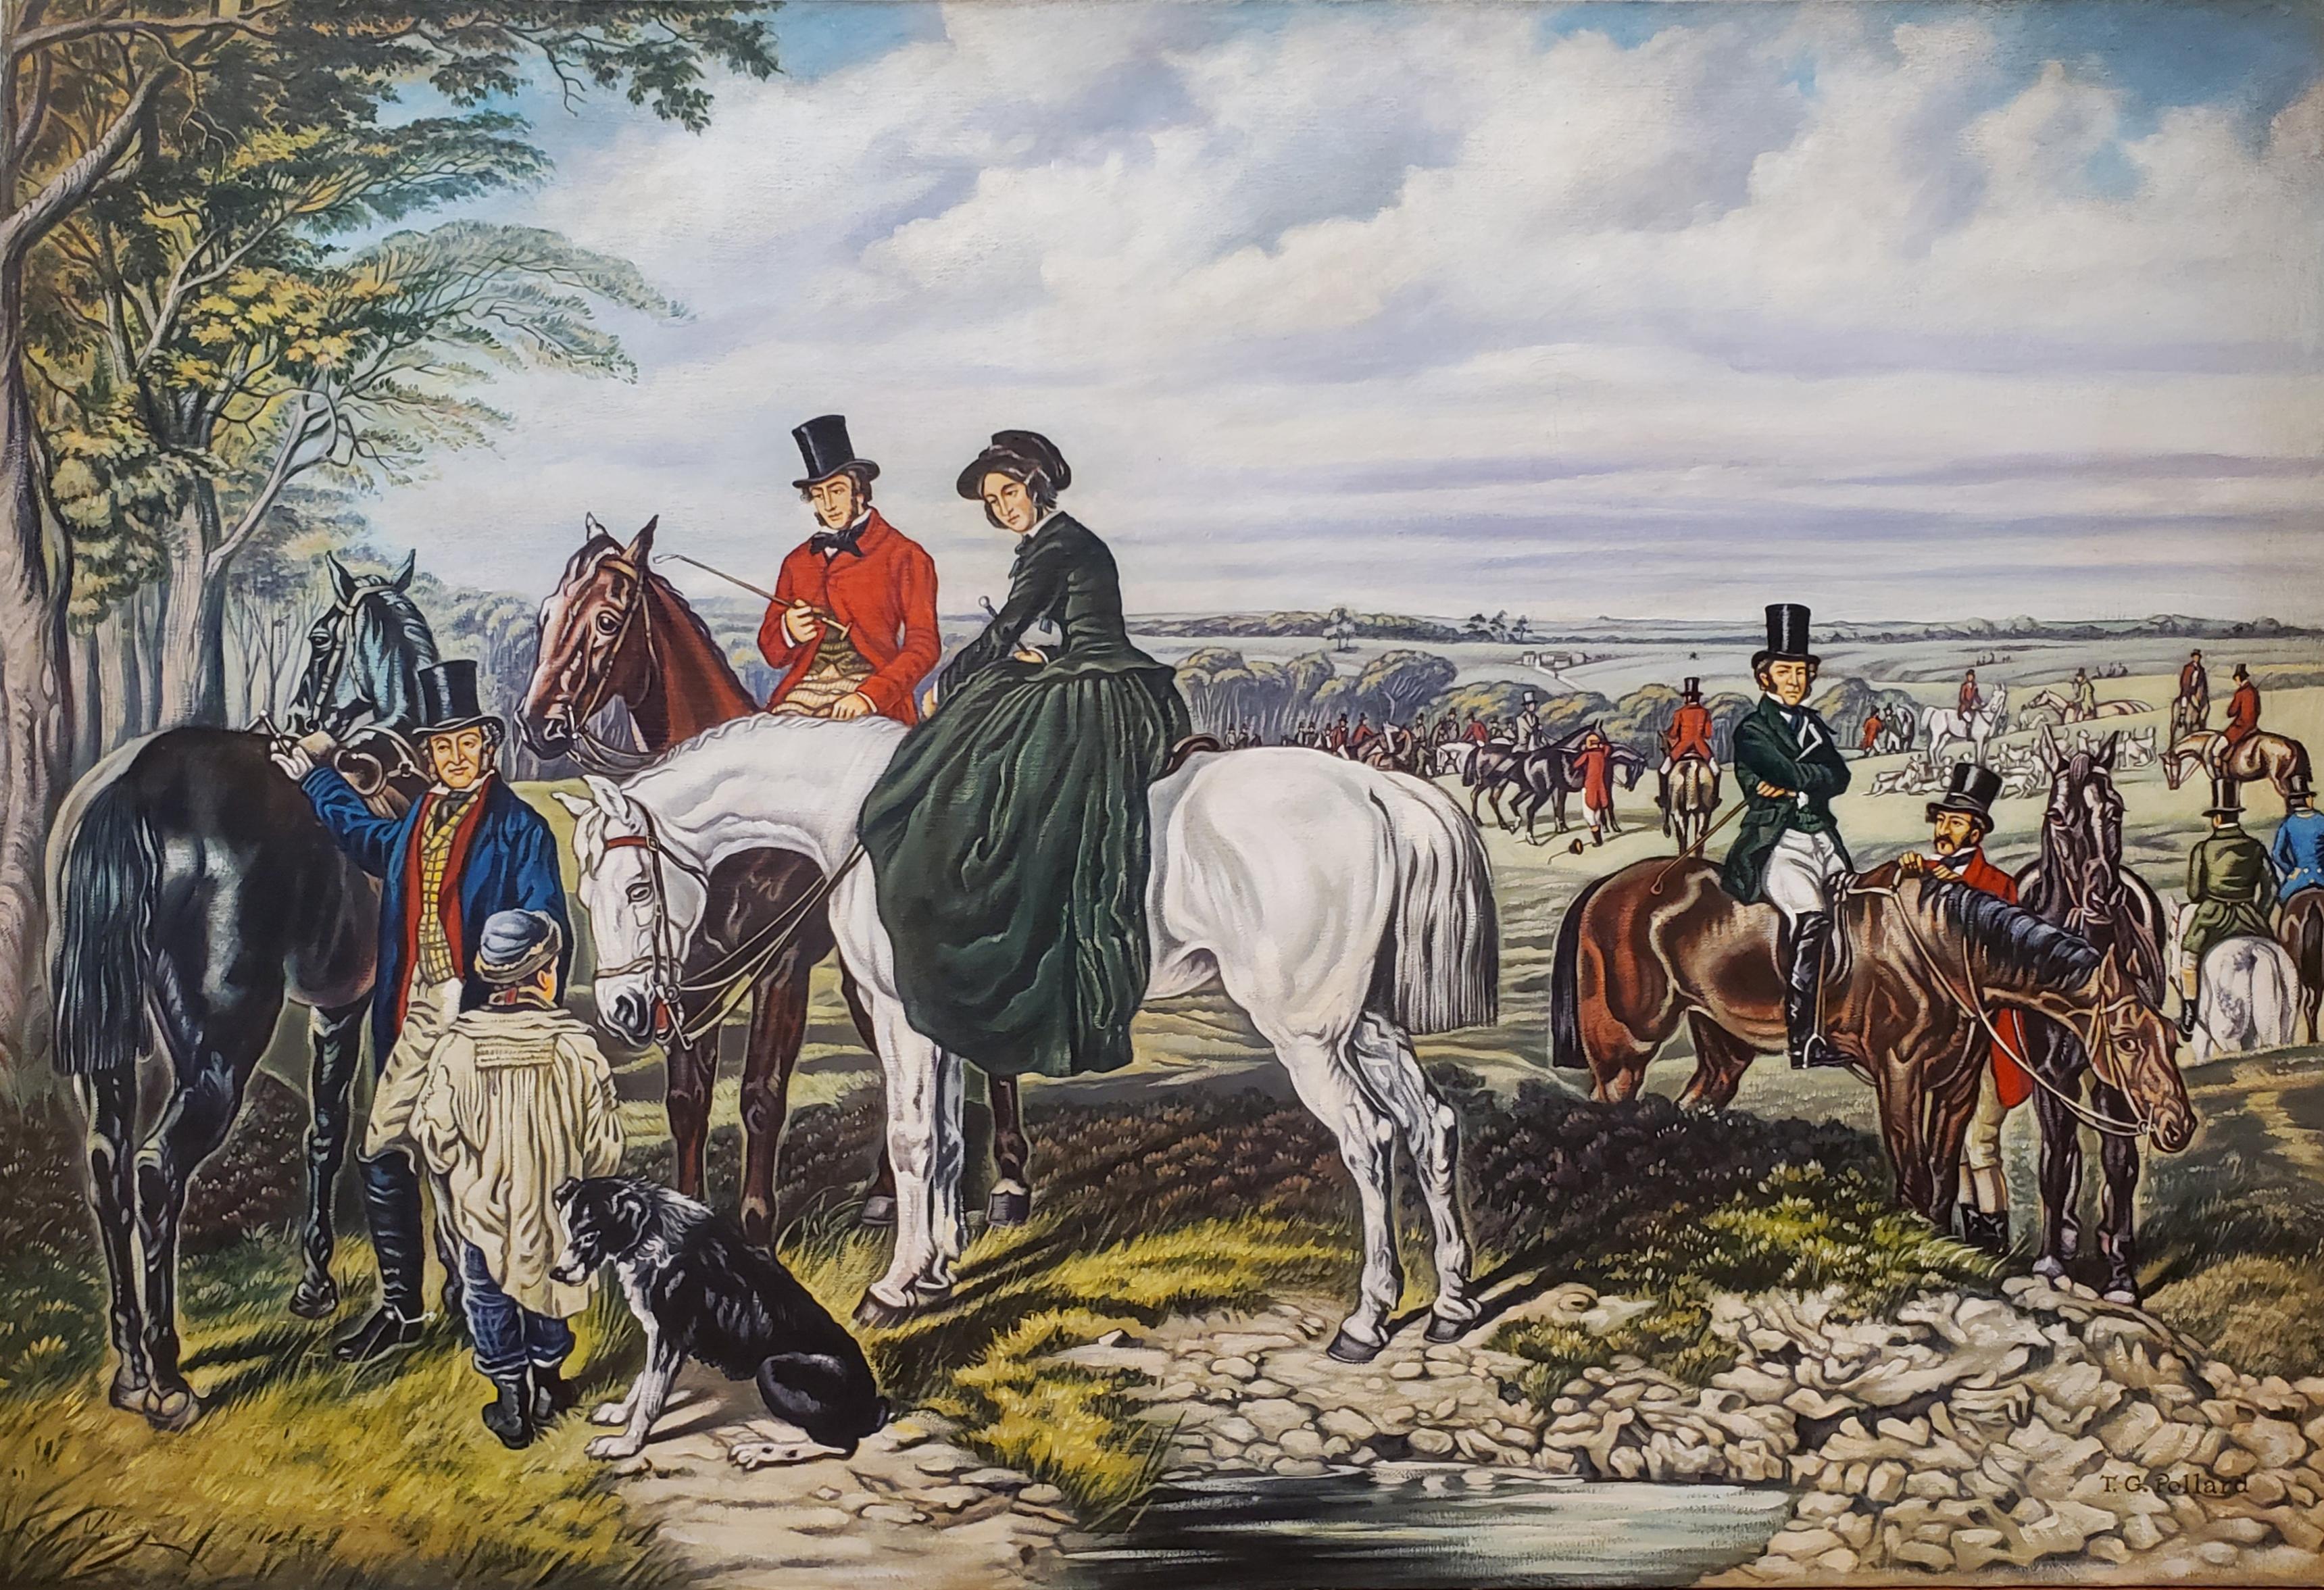 what american landscape artist painted the fox hunt